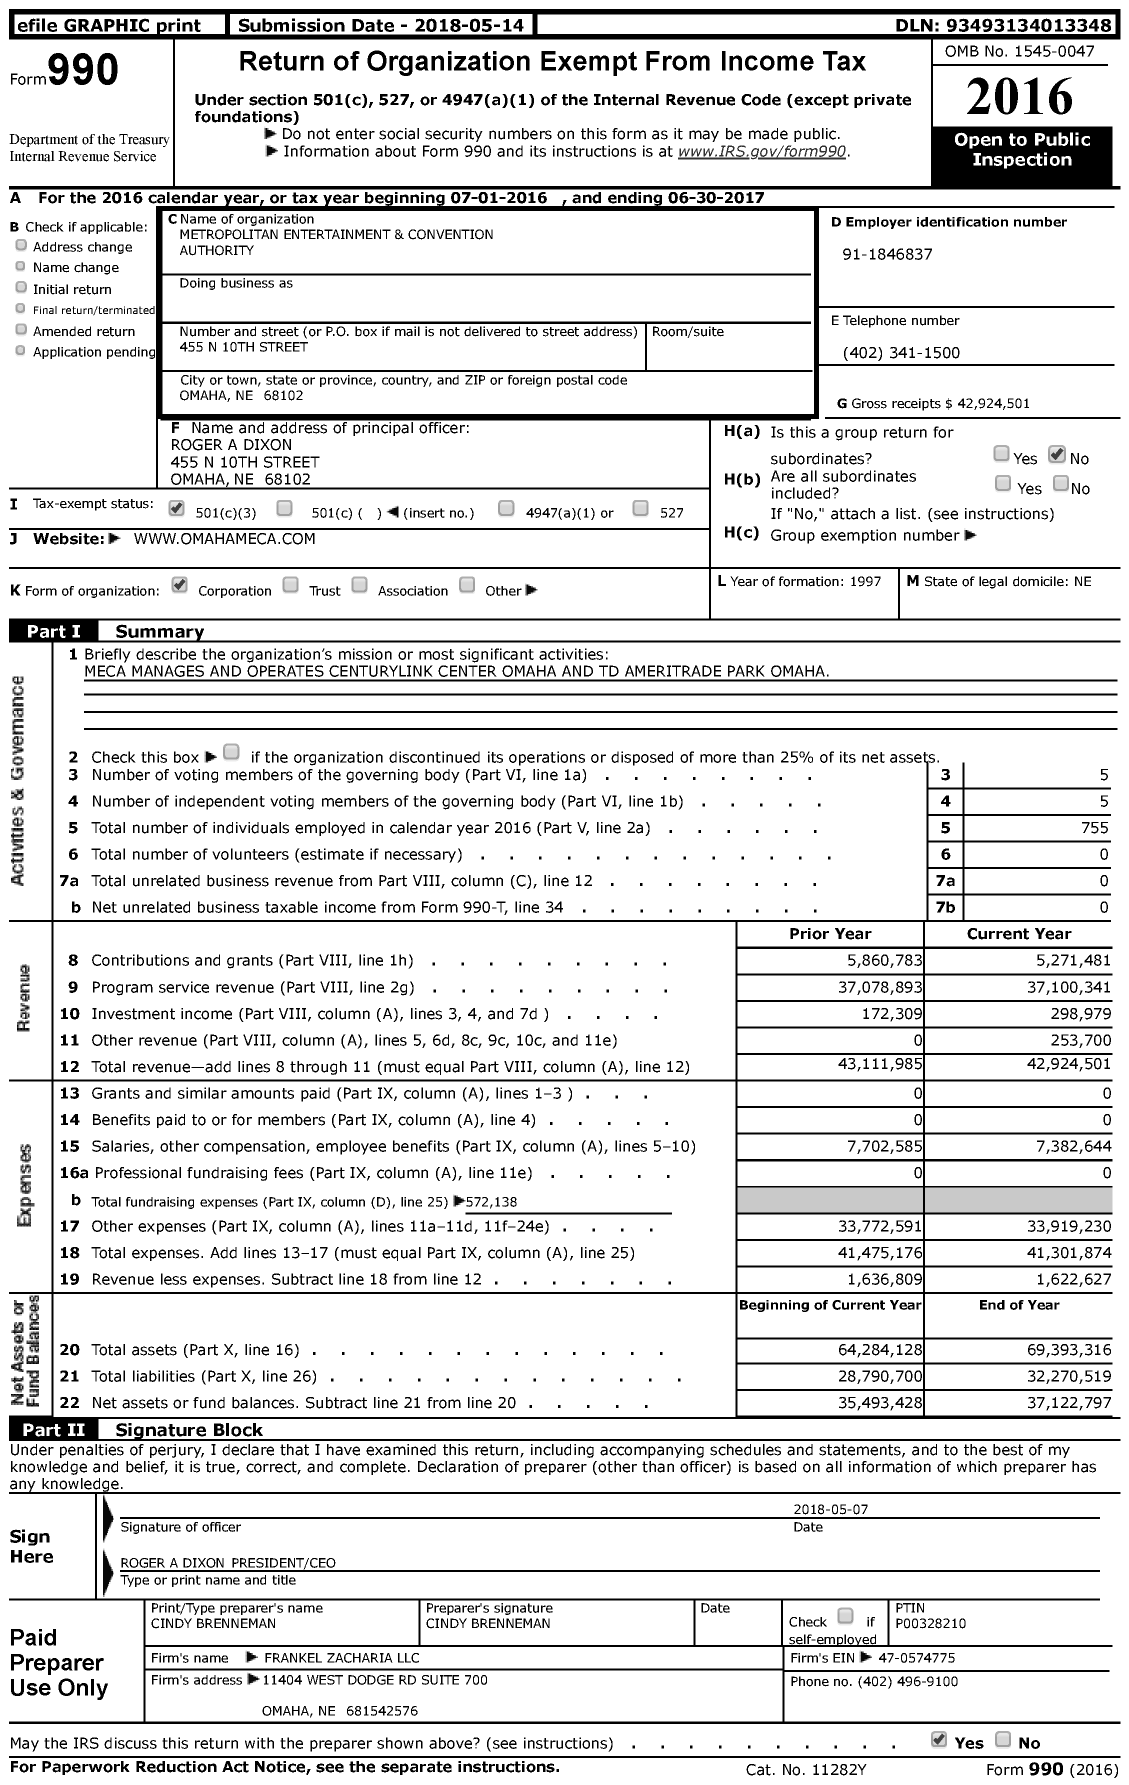 Image of first page of 2016 Form 990 for Metropolitan Entertainment and Convention Authority (MECA)